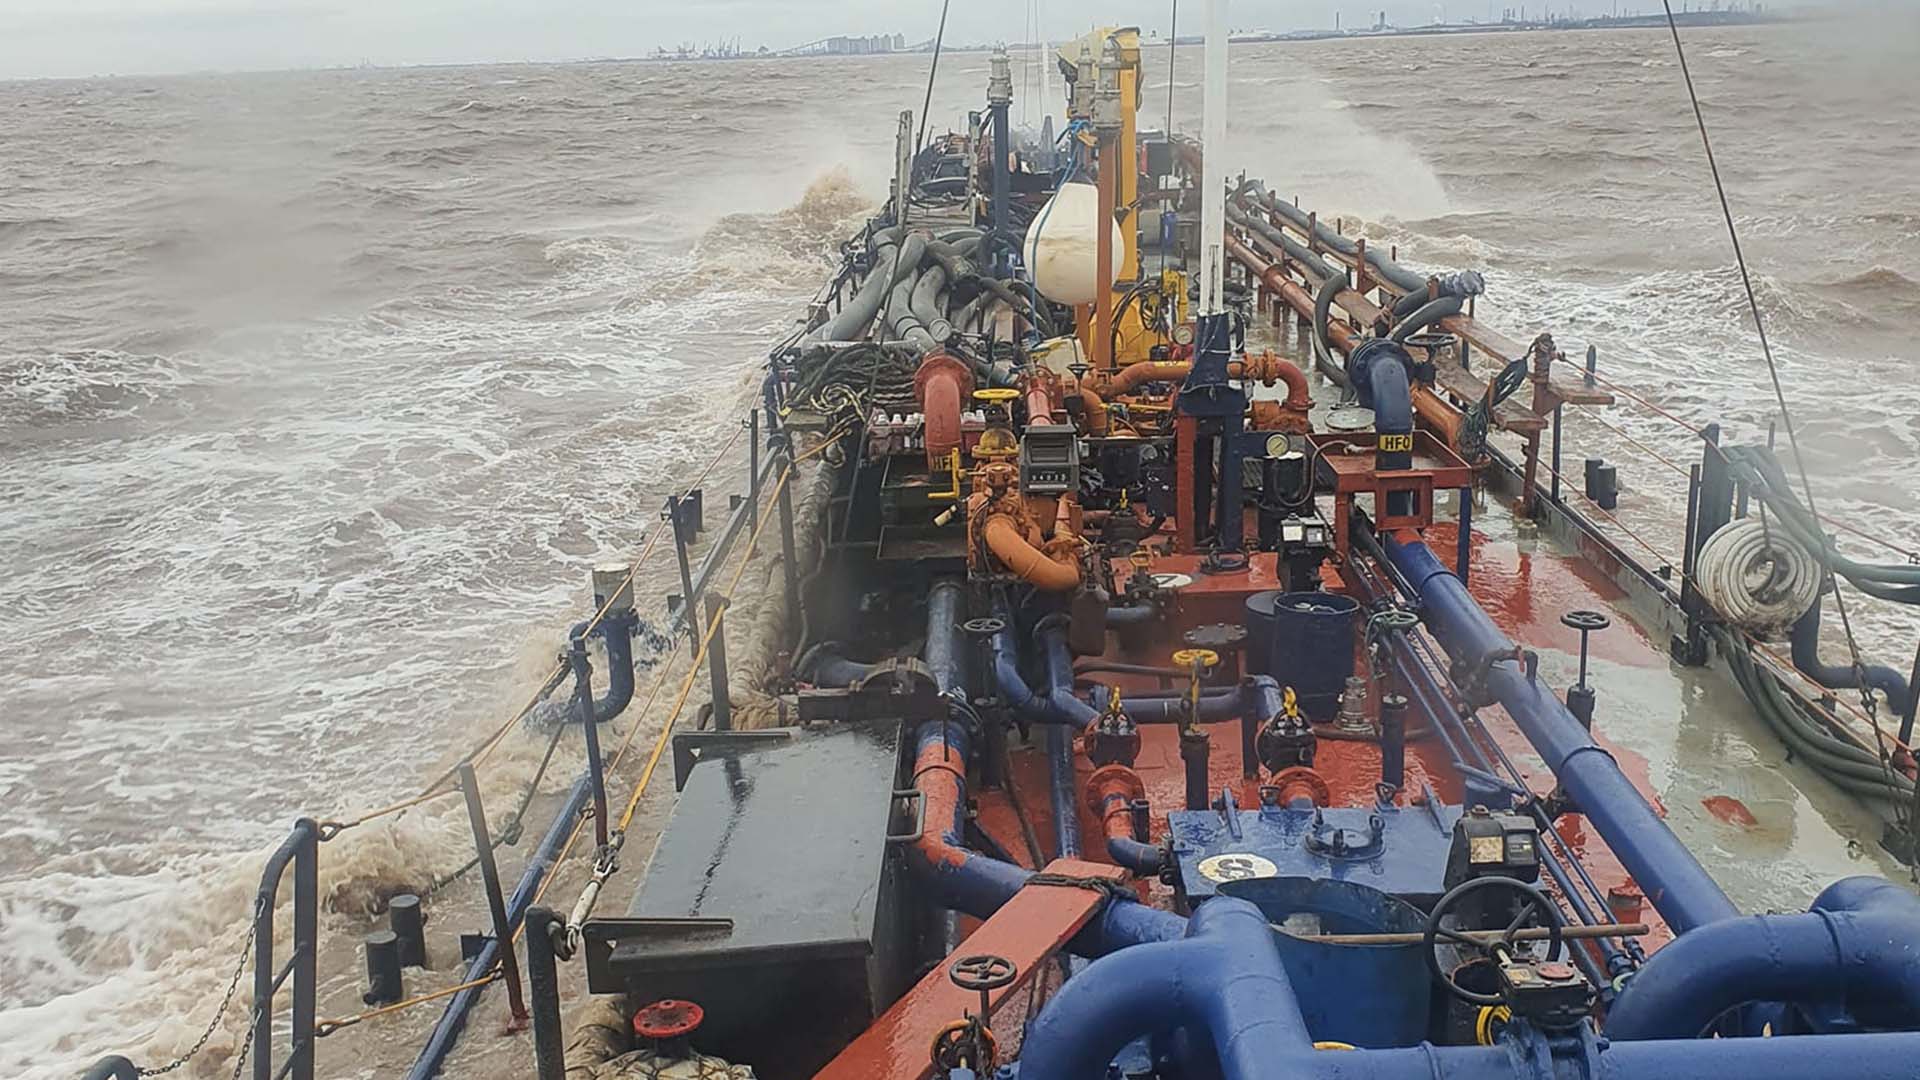 Life aboard the Rix Phoenix sailing to Immingham, captured by our onboard crew.